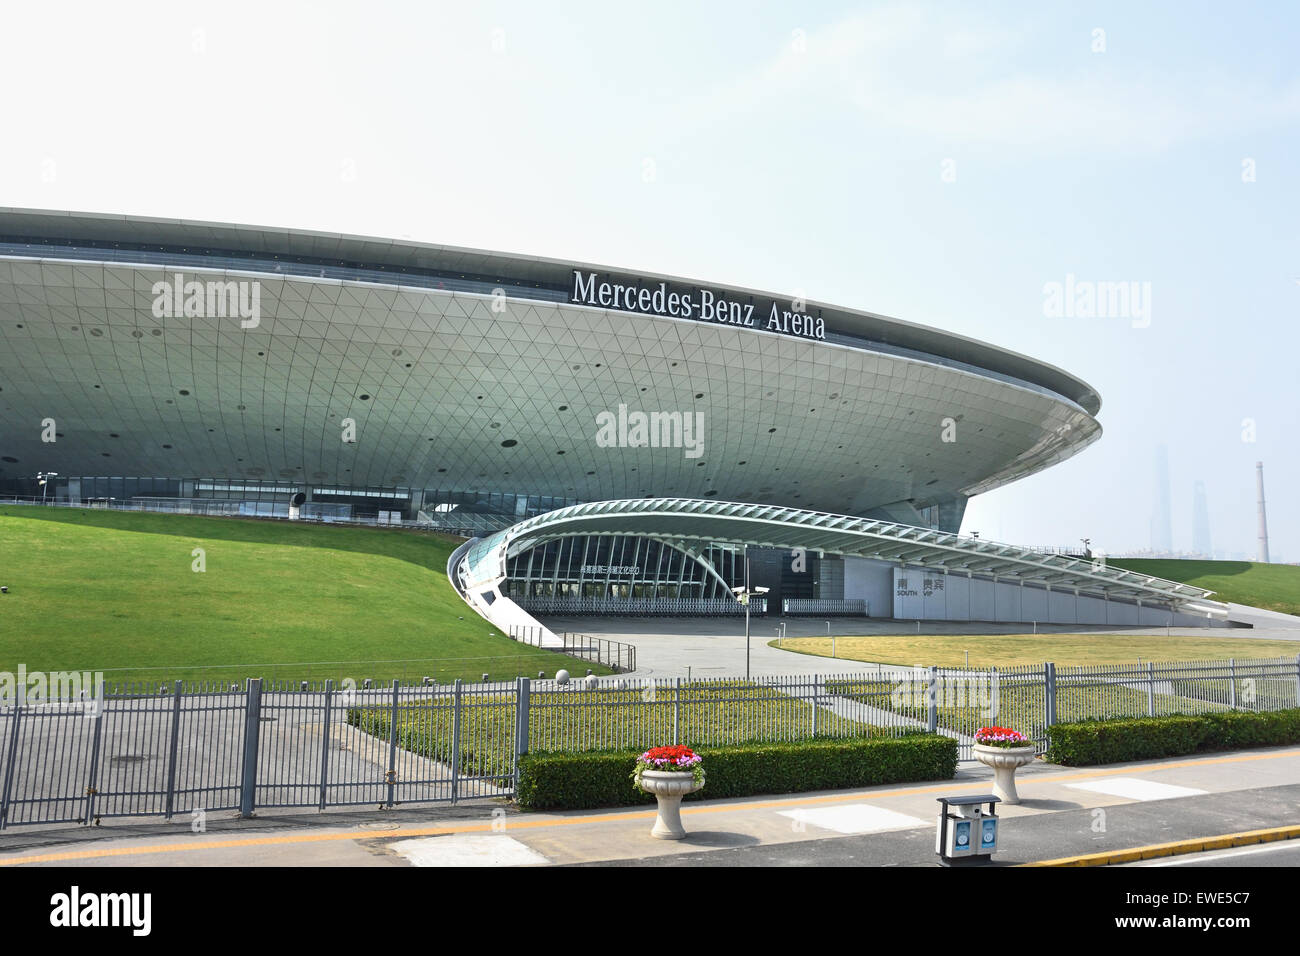 Mercedes Benz Arena Pudong Shanghai China Chinese Stock Photo